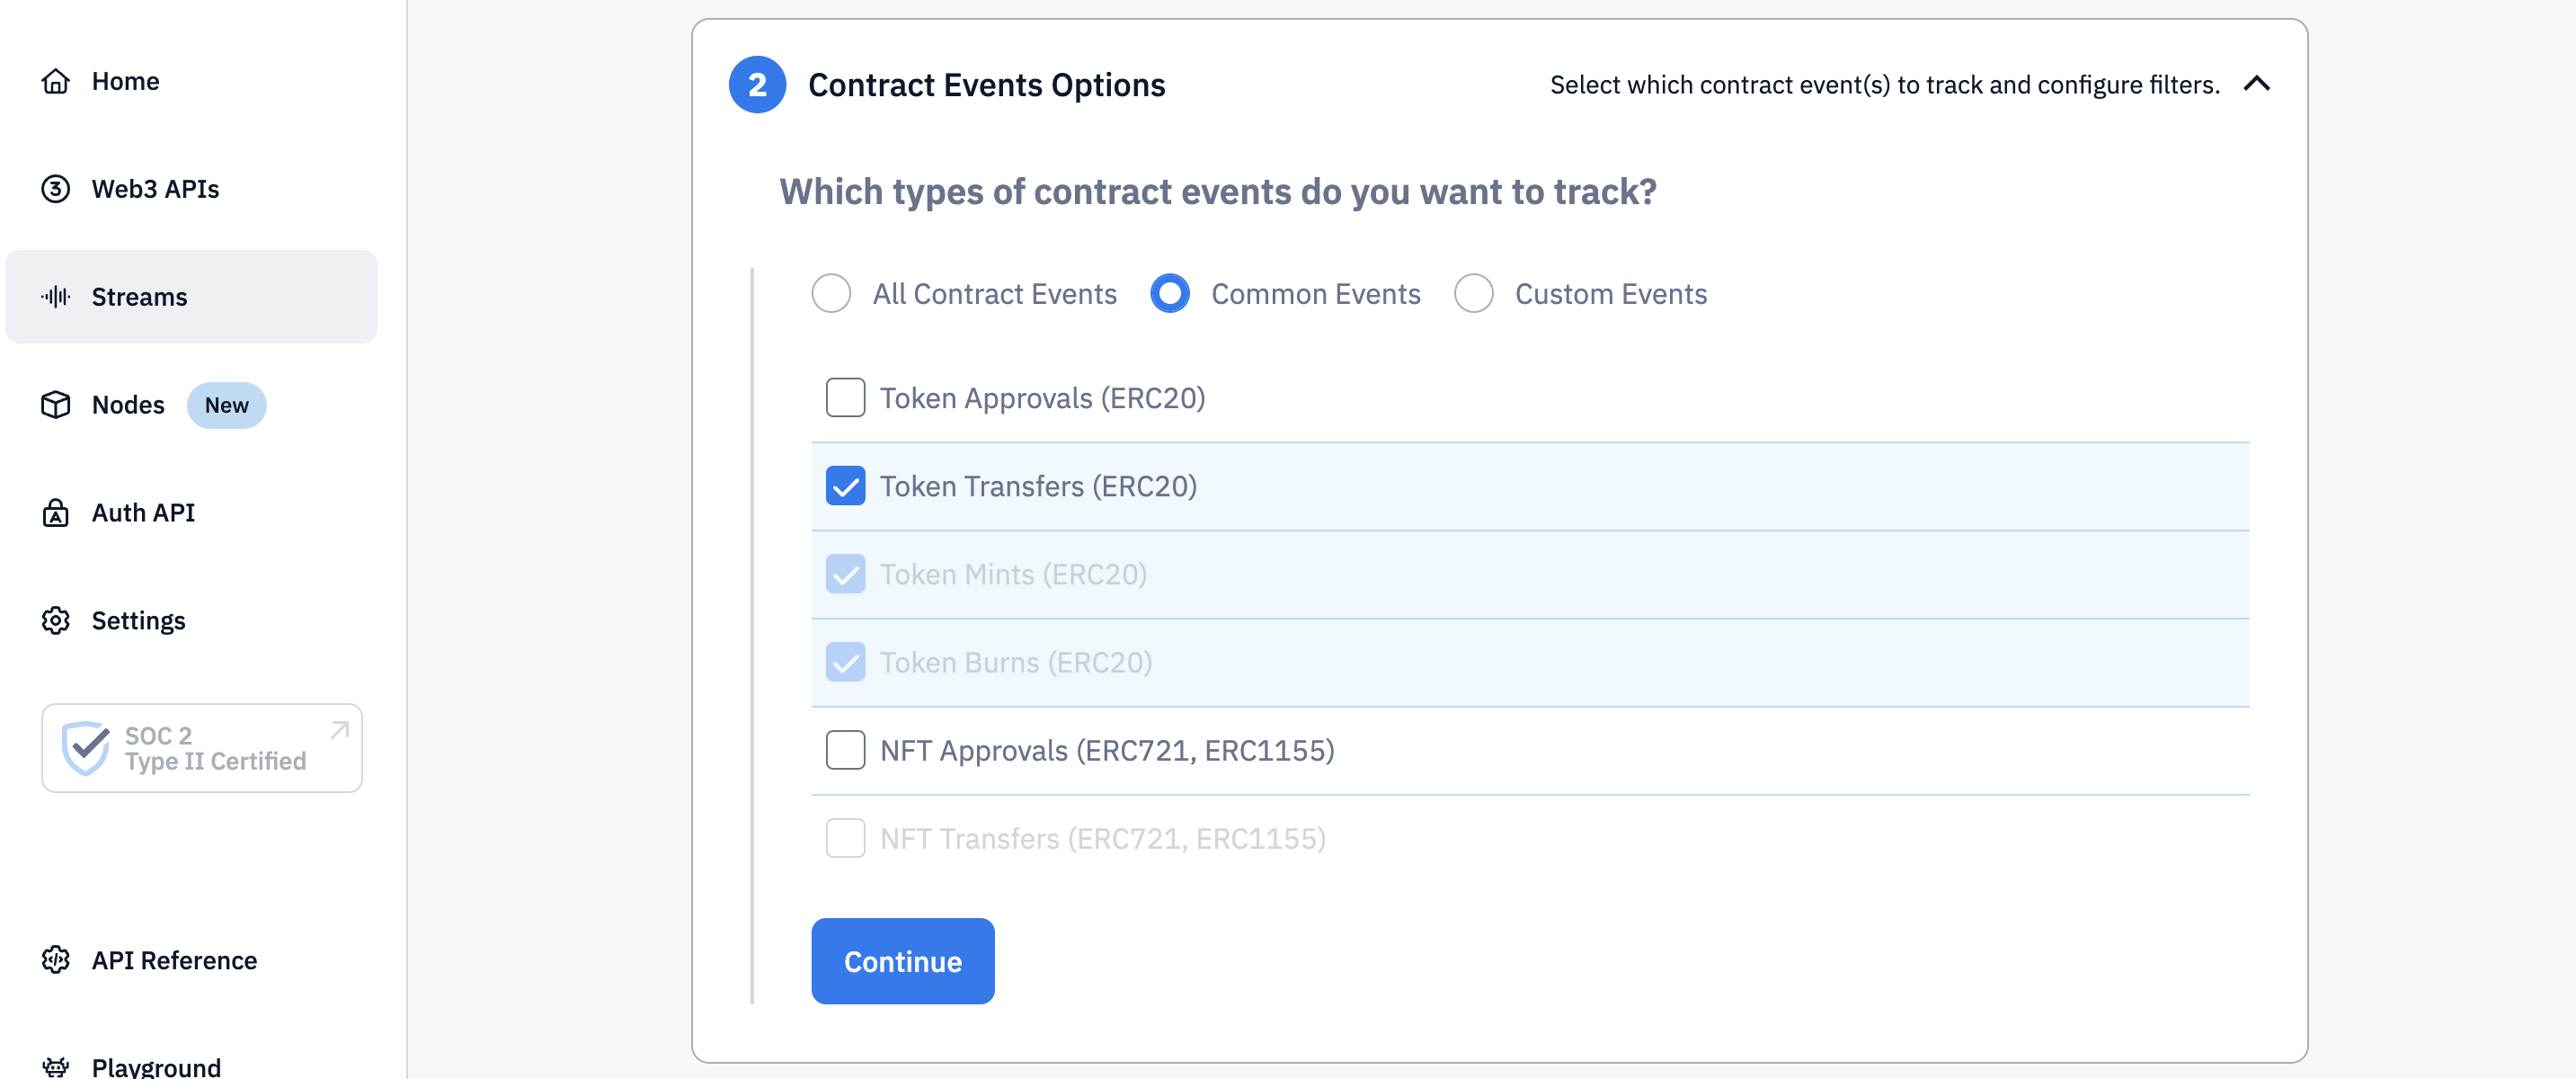 Step 3 - Specify what contract events you want to track. For this tutorial, we’ll choose ”Common Events” followed by ”Token Transfers”: 